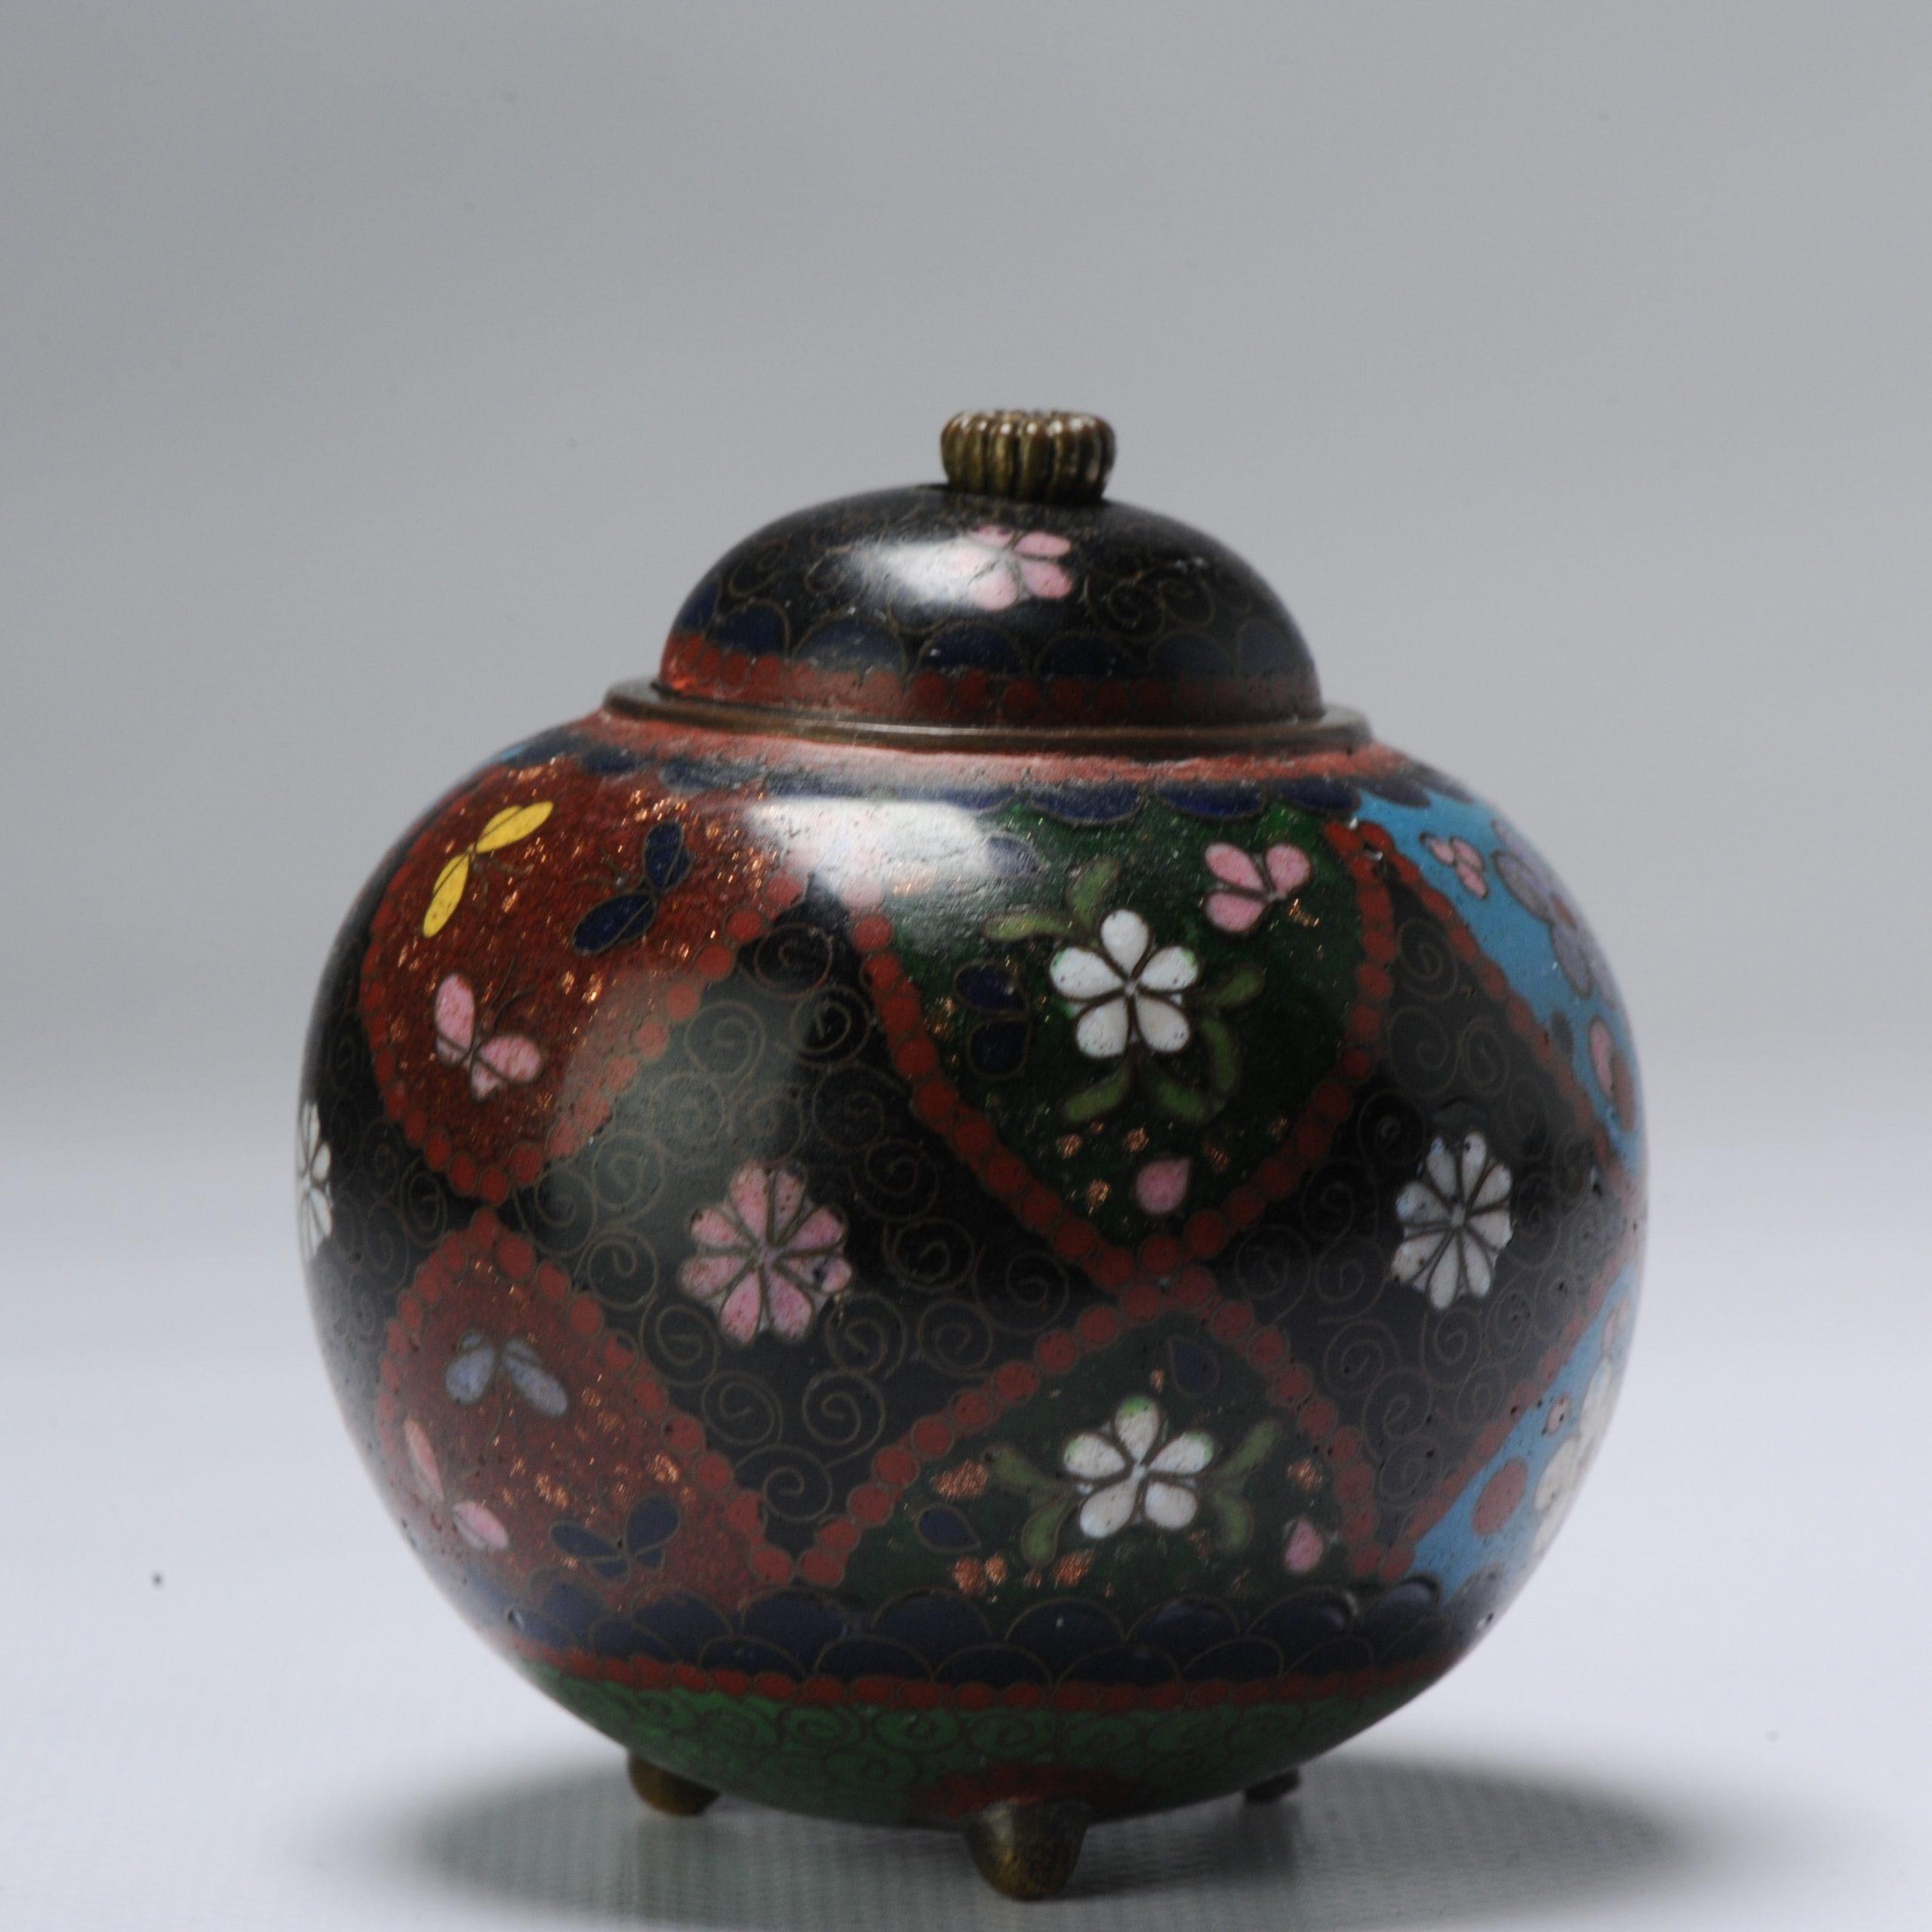 Description

Lovely and beautifully made piece.

Provenance:

Originally part of the Catherina collection of Japanese bronzes and cloisonne that was partly auctioned in Amsterdam in 2006 at Sothebys. Some pieces are pictured in the catalogue